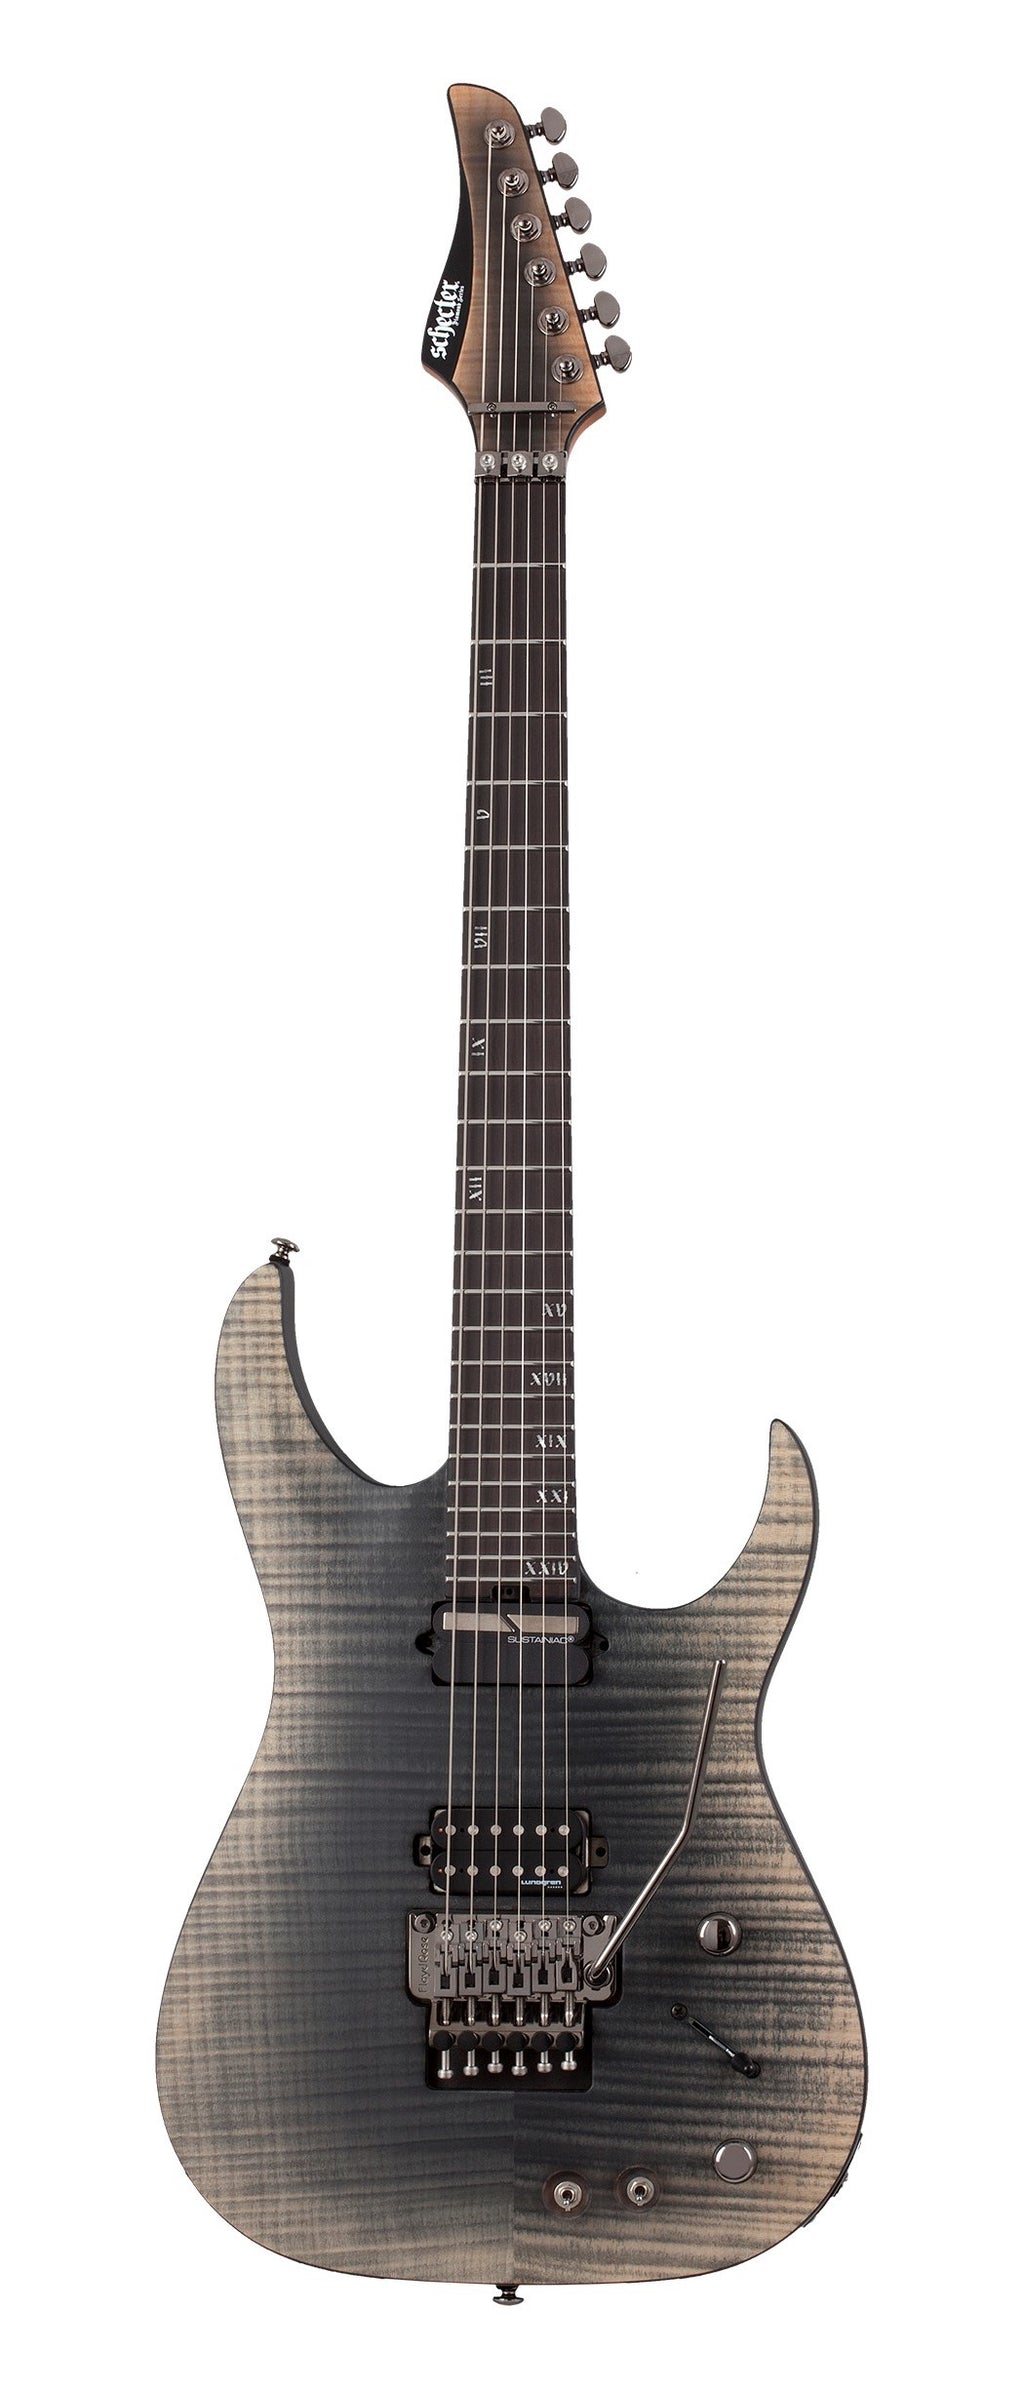 Schecter Banshee Mach-6 FR-S 6-String Electric Guitar in Fallout Burst Finish